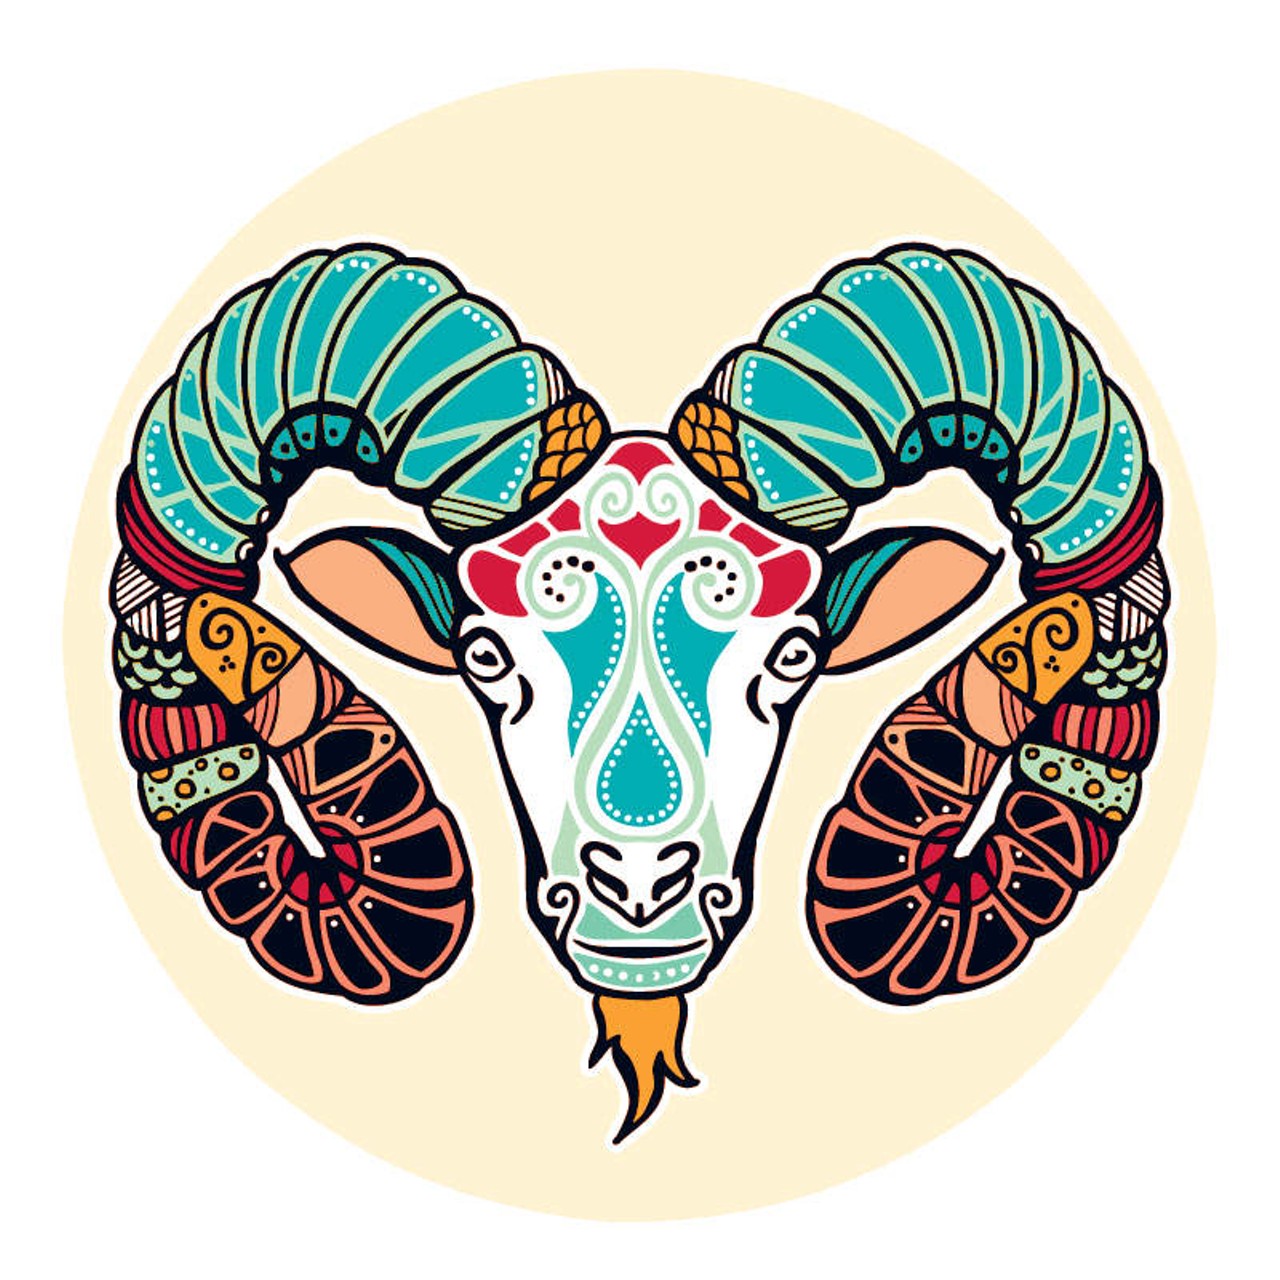 ARIES (March 21- April 20): 
You can&#146;t expect this to turn into a fairy tale. Your experience is showing you a great deal about yourself. If you can put your finger on what made things so complicated it will take you all the way back to your childhood. This is why you can&#146;t put a Band-Aid on your current situation; the story is deep and it runs you from within. Whatever&#146;s going on isn&#146;t going to change its tune until you reckon with the past and begin to realize that you can&#146;t make a life out of its remnants. Pull yourself together, look at this for what it is, and accept the fact that it may be time to move on.